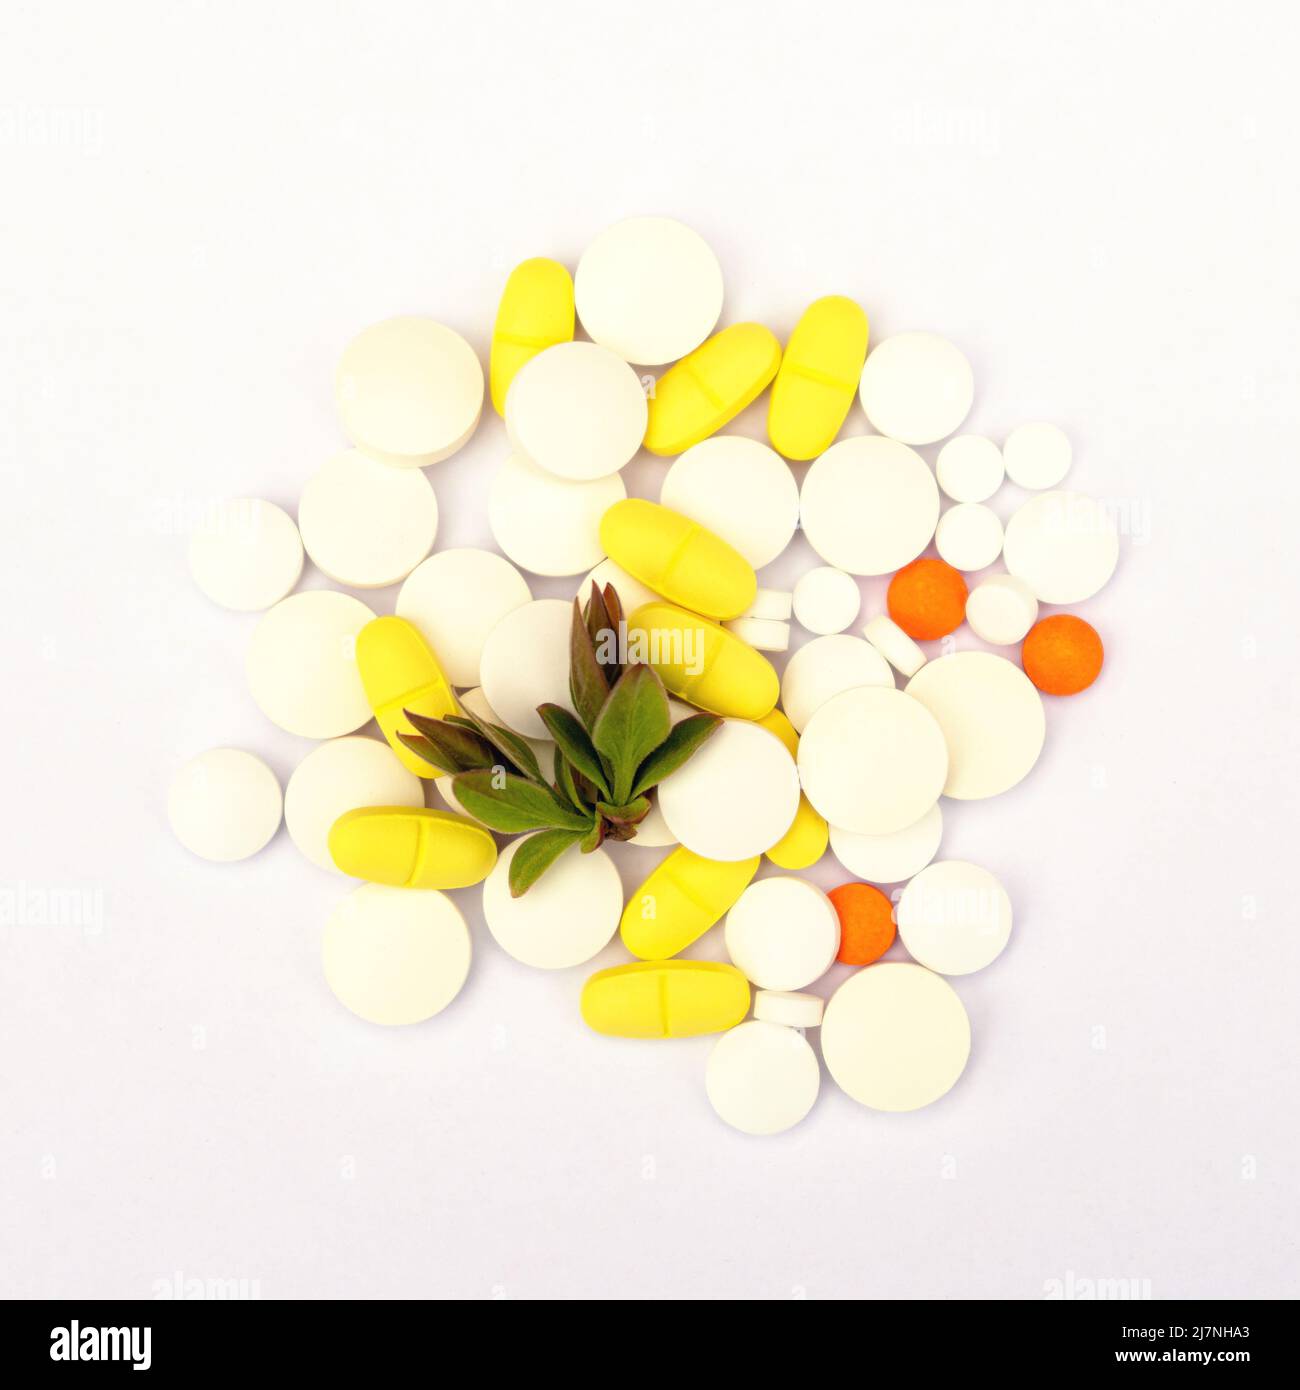 Pills with sprigs of plants on a white background Stock Photo